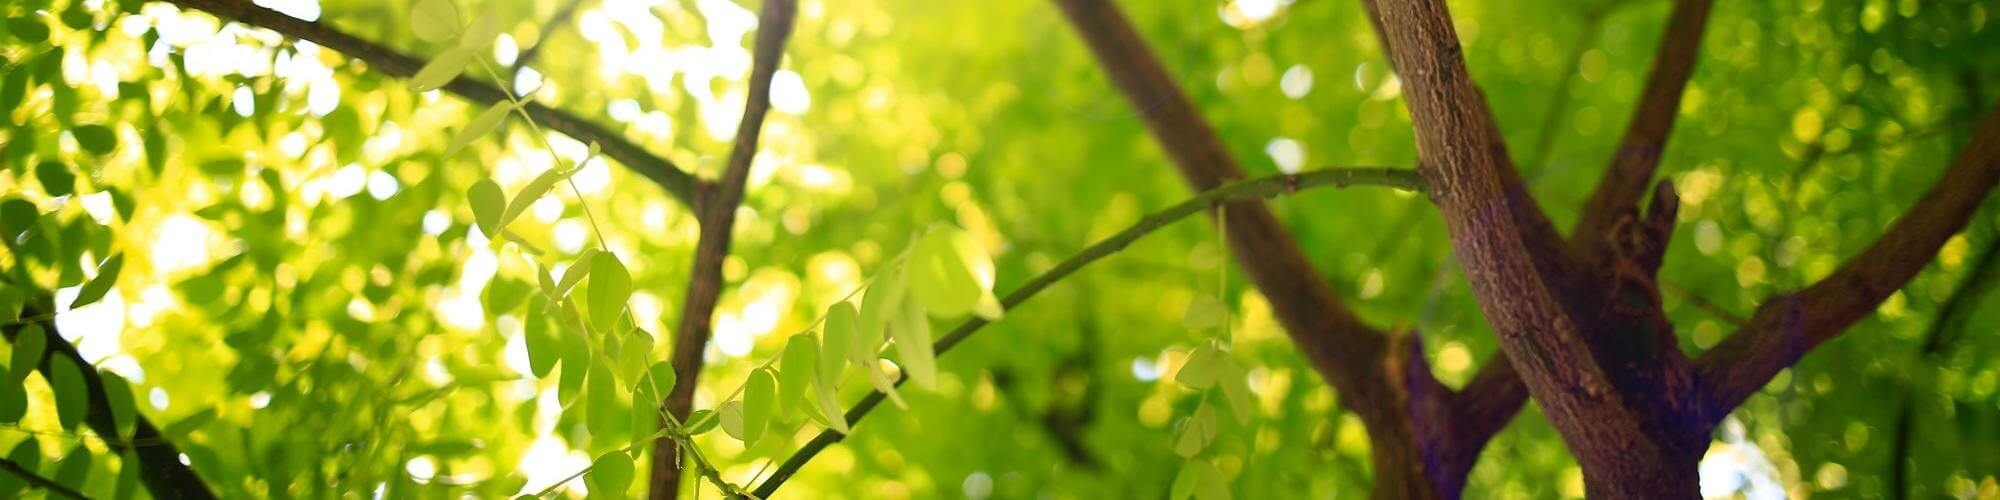 Thin tree branches with green leaves on a sunny day